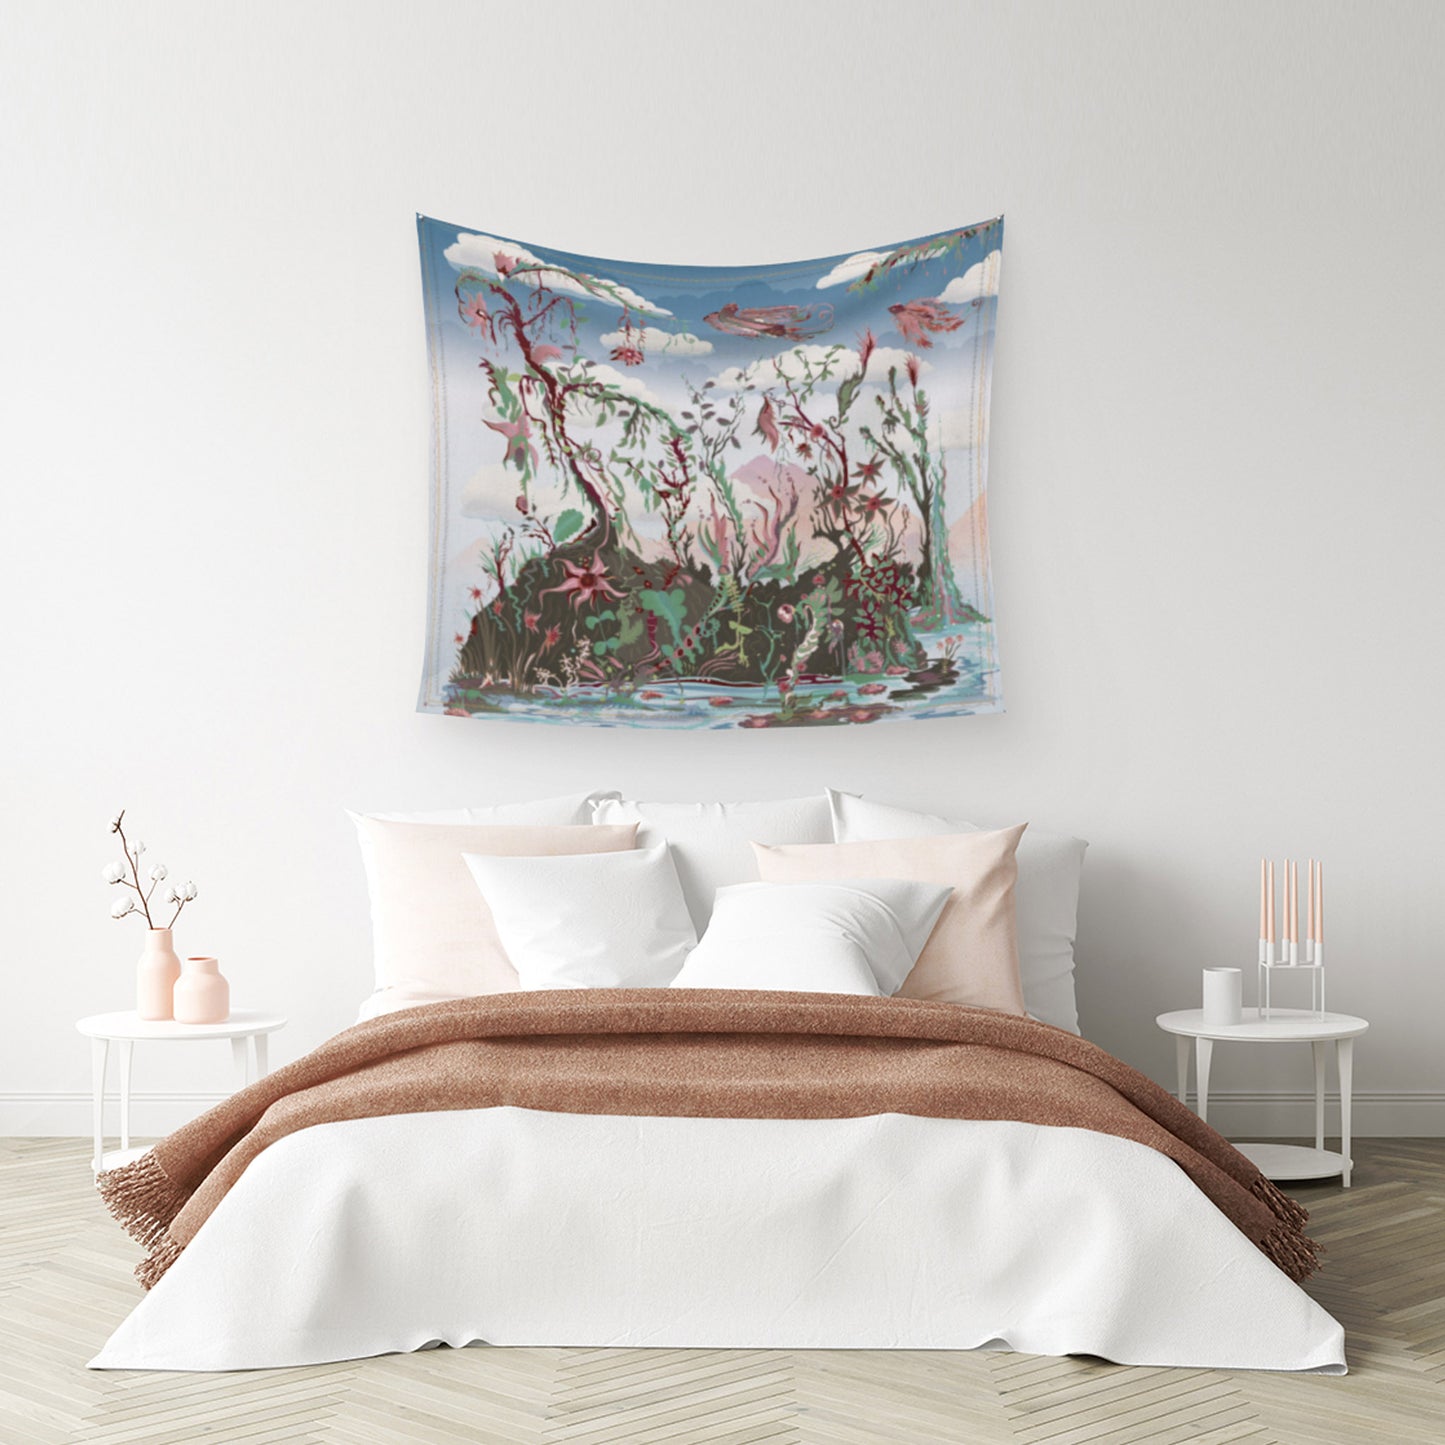 bedroom mockup for tapestry on a wall with digital design showing the hummingbird queen being followed closely by the hummingbird king over an imaginary land of plants and trees, all beneath a cloud cover, above a bed with many, many pillows and 2 blankets